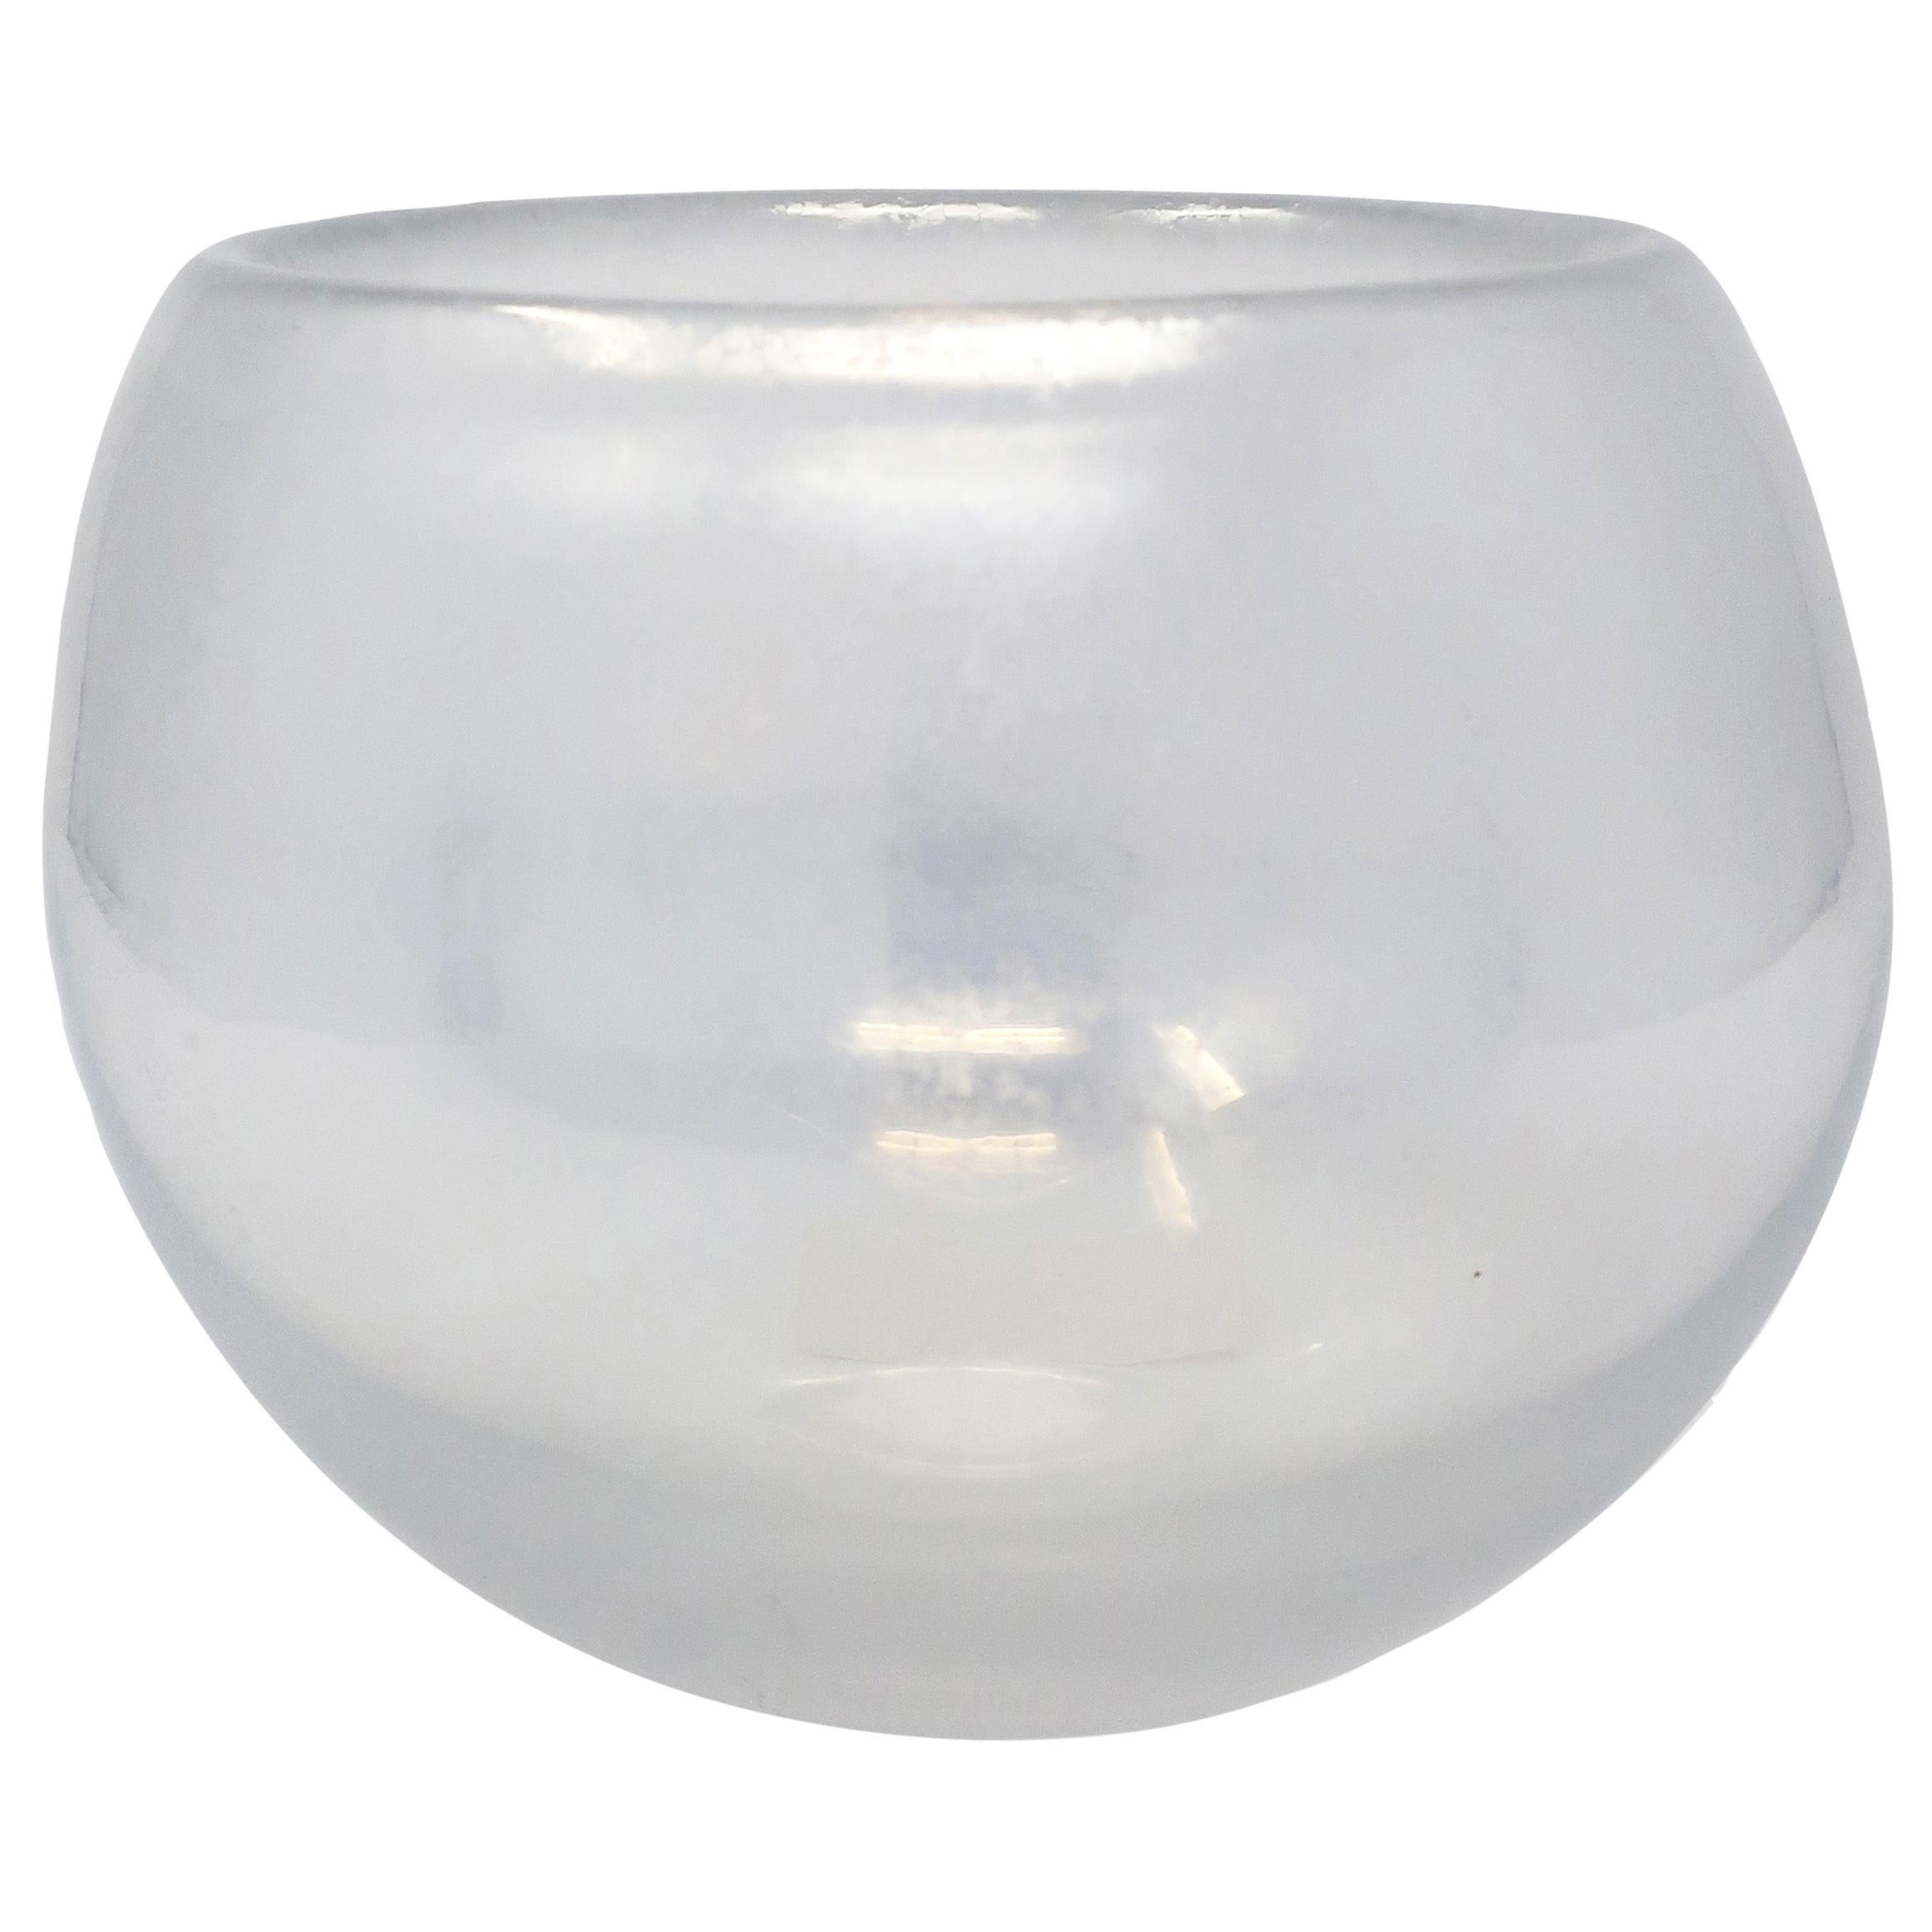 Iridescent Handblown Glass Lune Vase by Paola Navone for Arcade